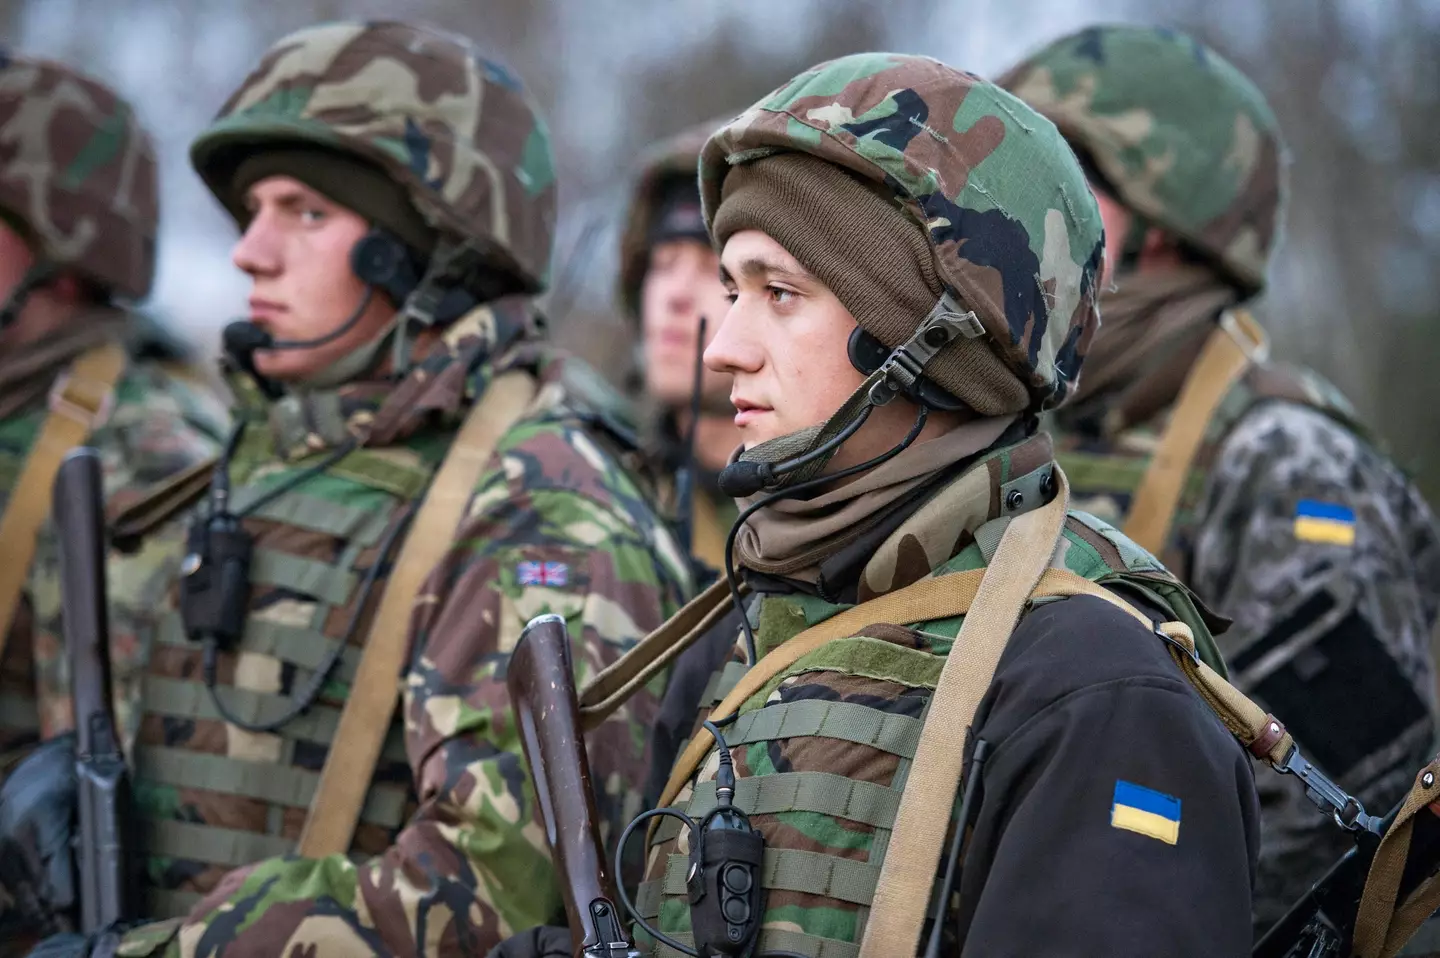 Ukrainian men aged between 18 and 60 are expected to stay and fight against Russia’s invasion.